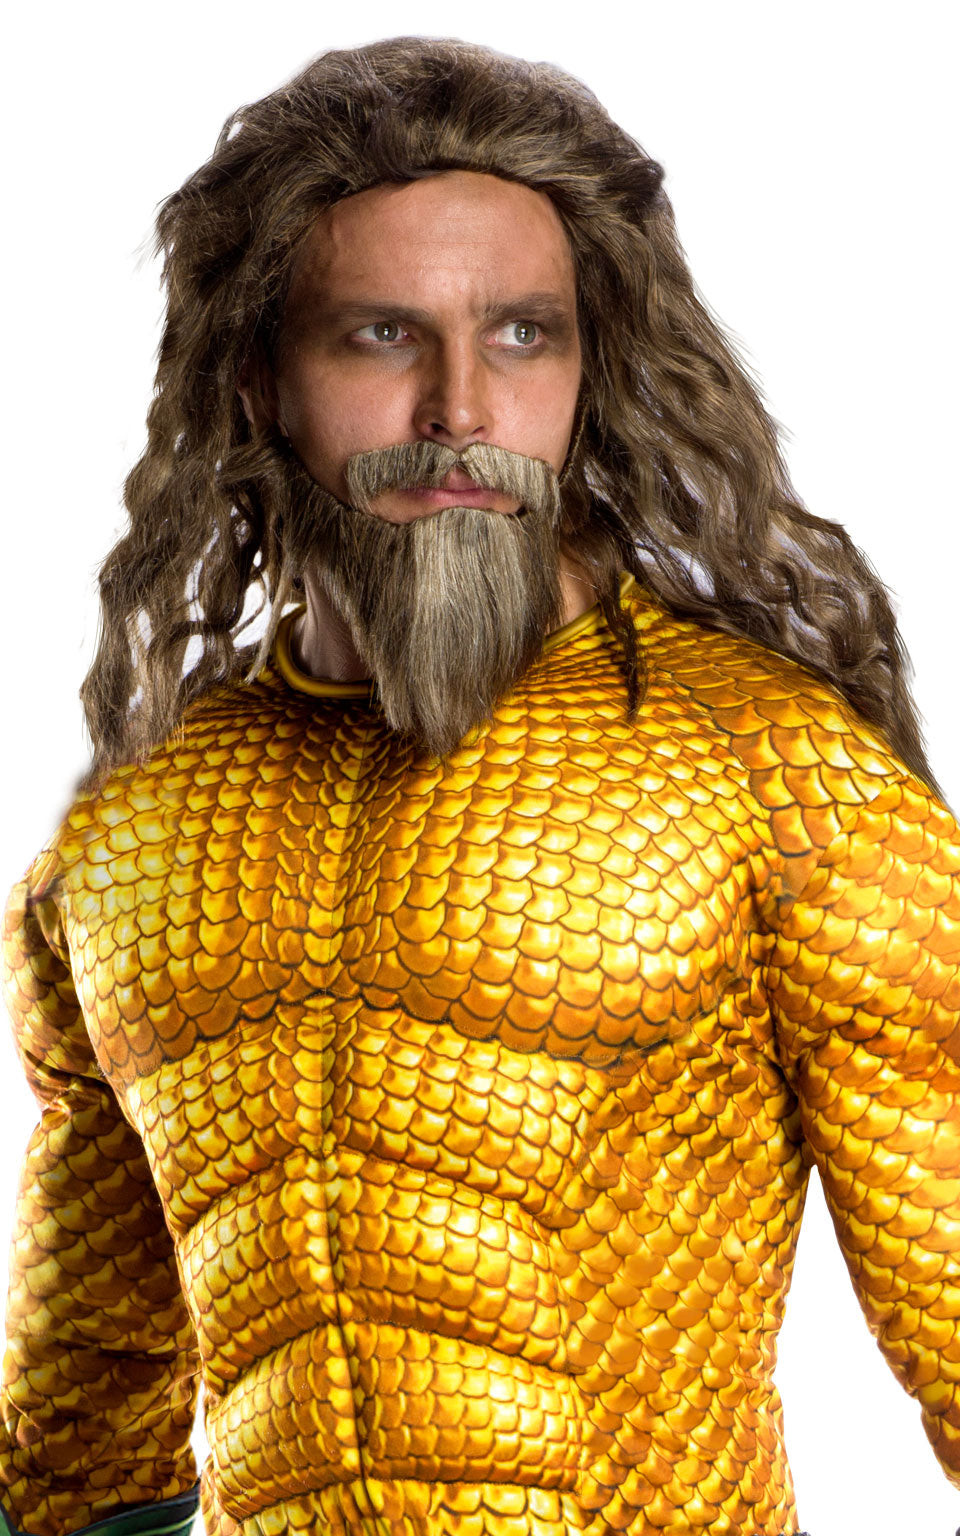 Deluxe Aquaman fancy dress outfit.